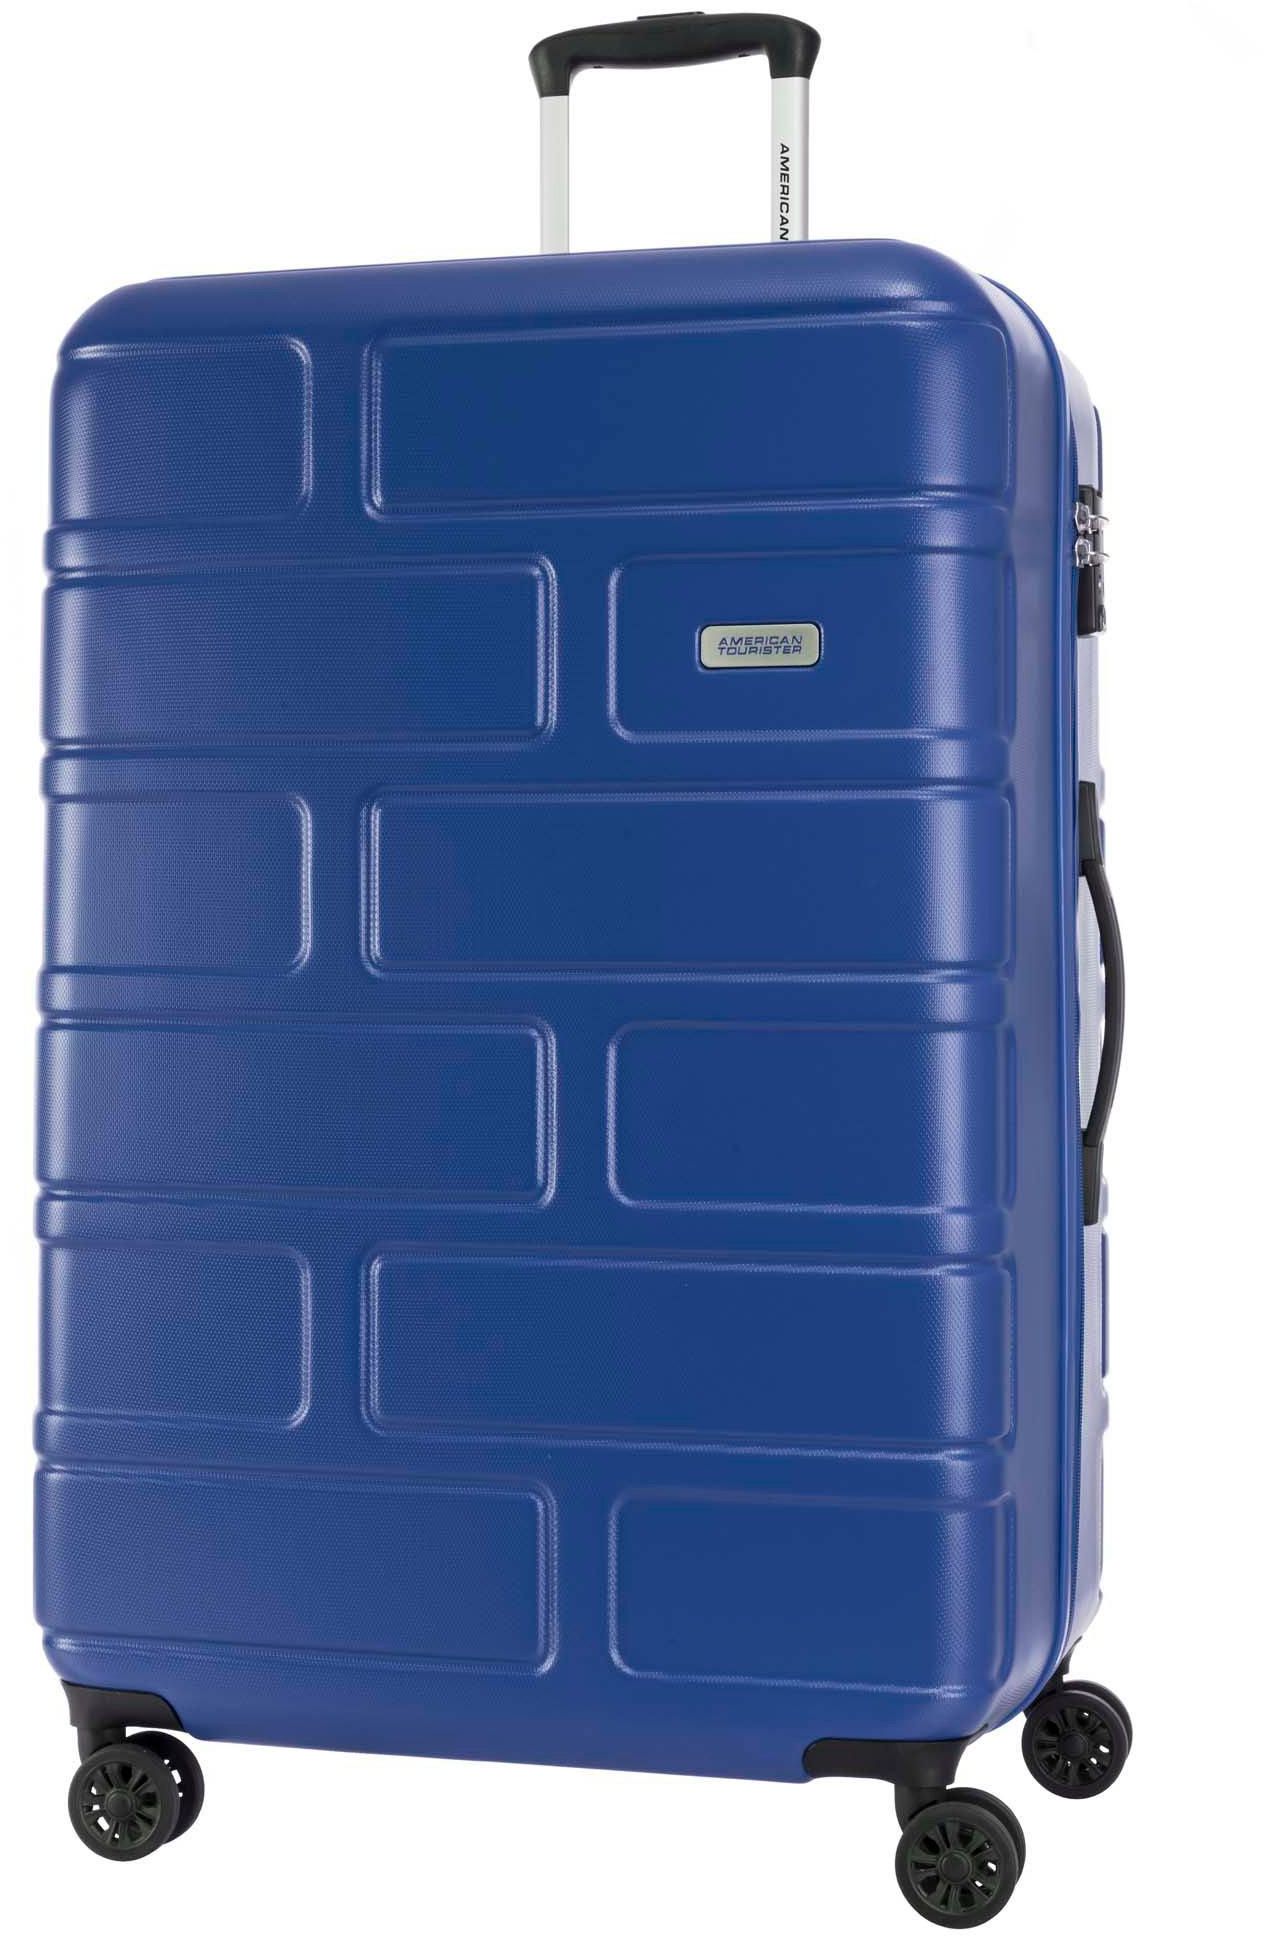 American Tourister Bricklane ABS Hard Luggage Trolley,  31 Inch, Oxford Blue